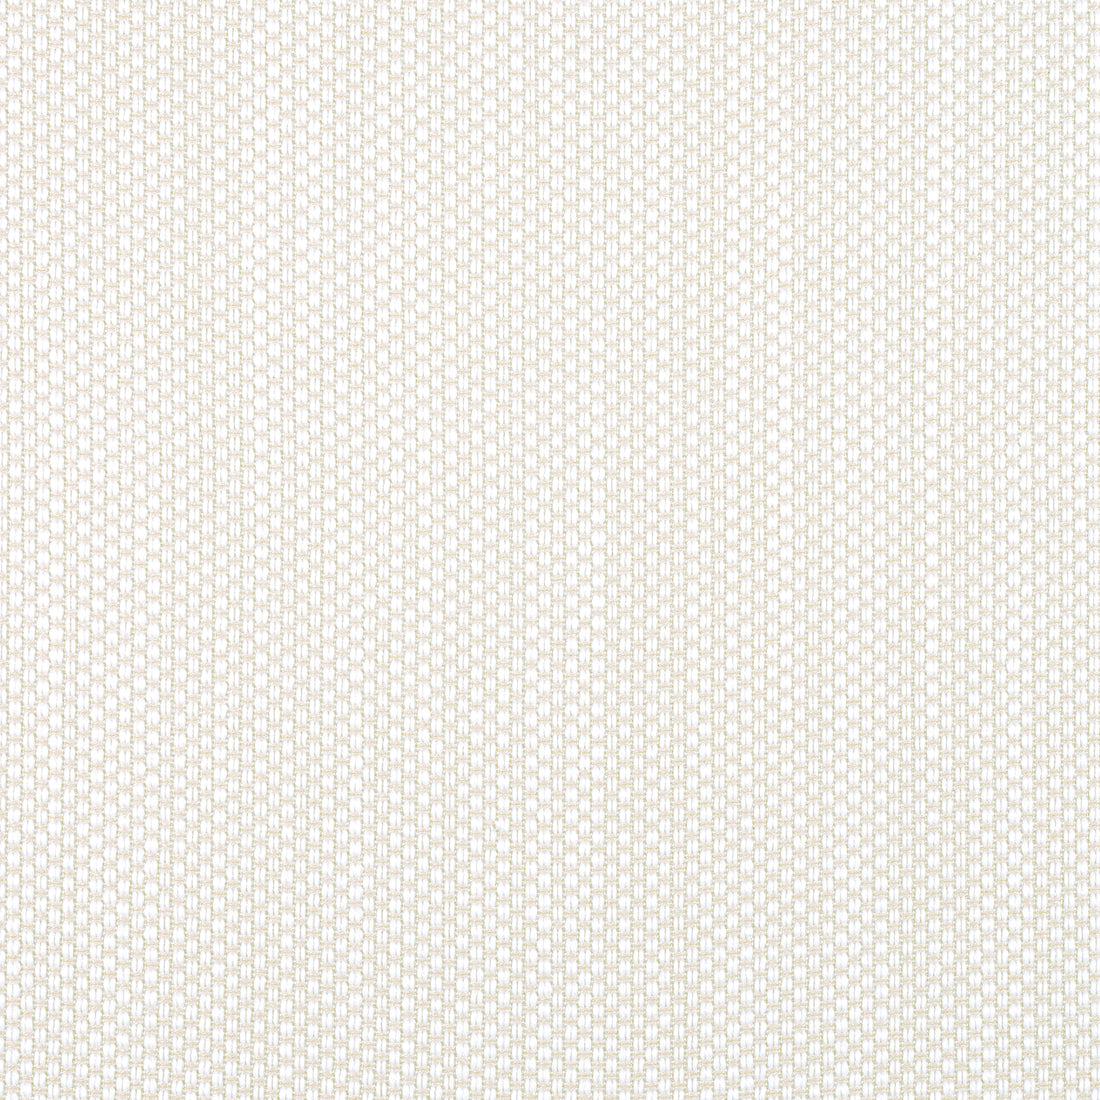 Ravenna fabric in sand color - pattern number W8614 - by Thibaut in the Villa Textures collection